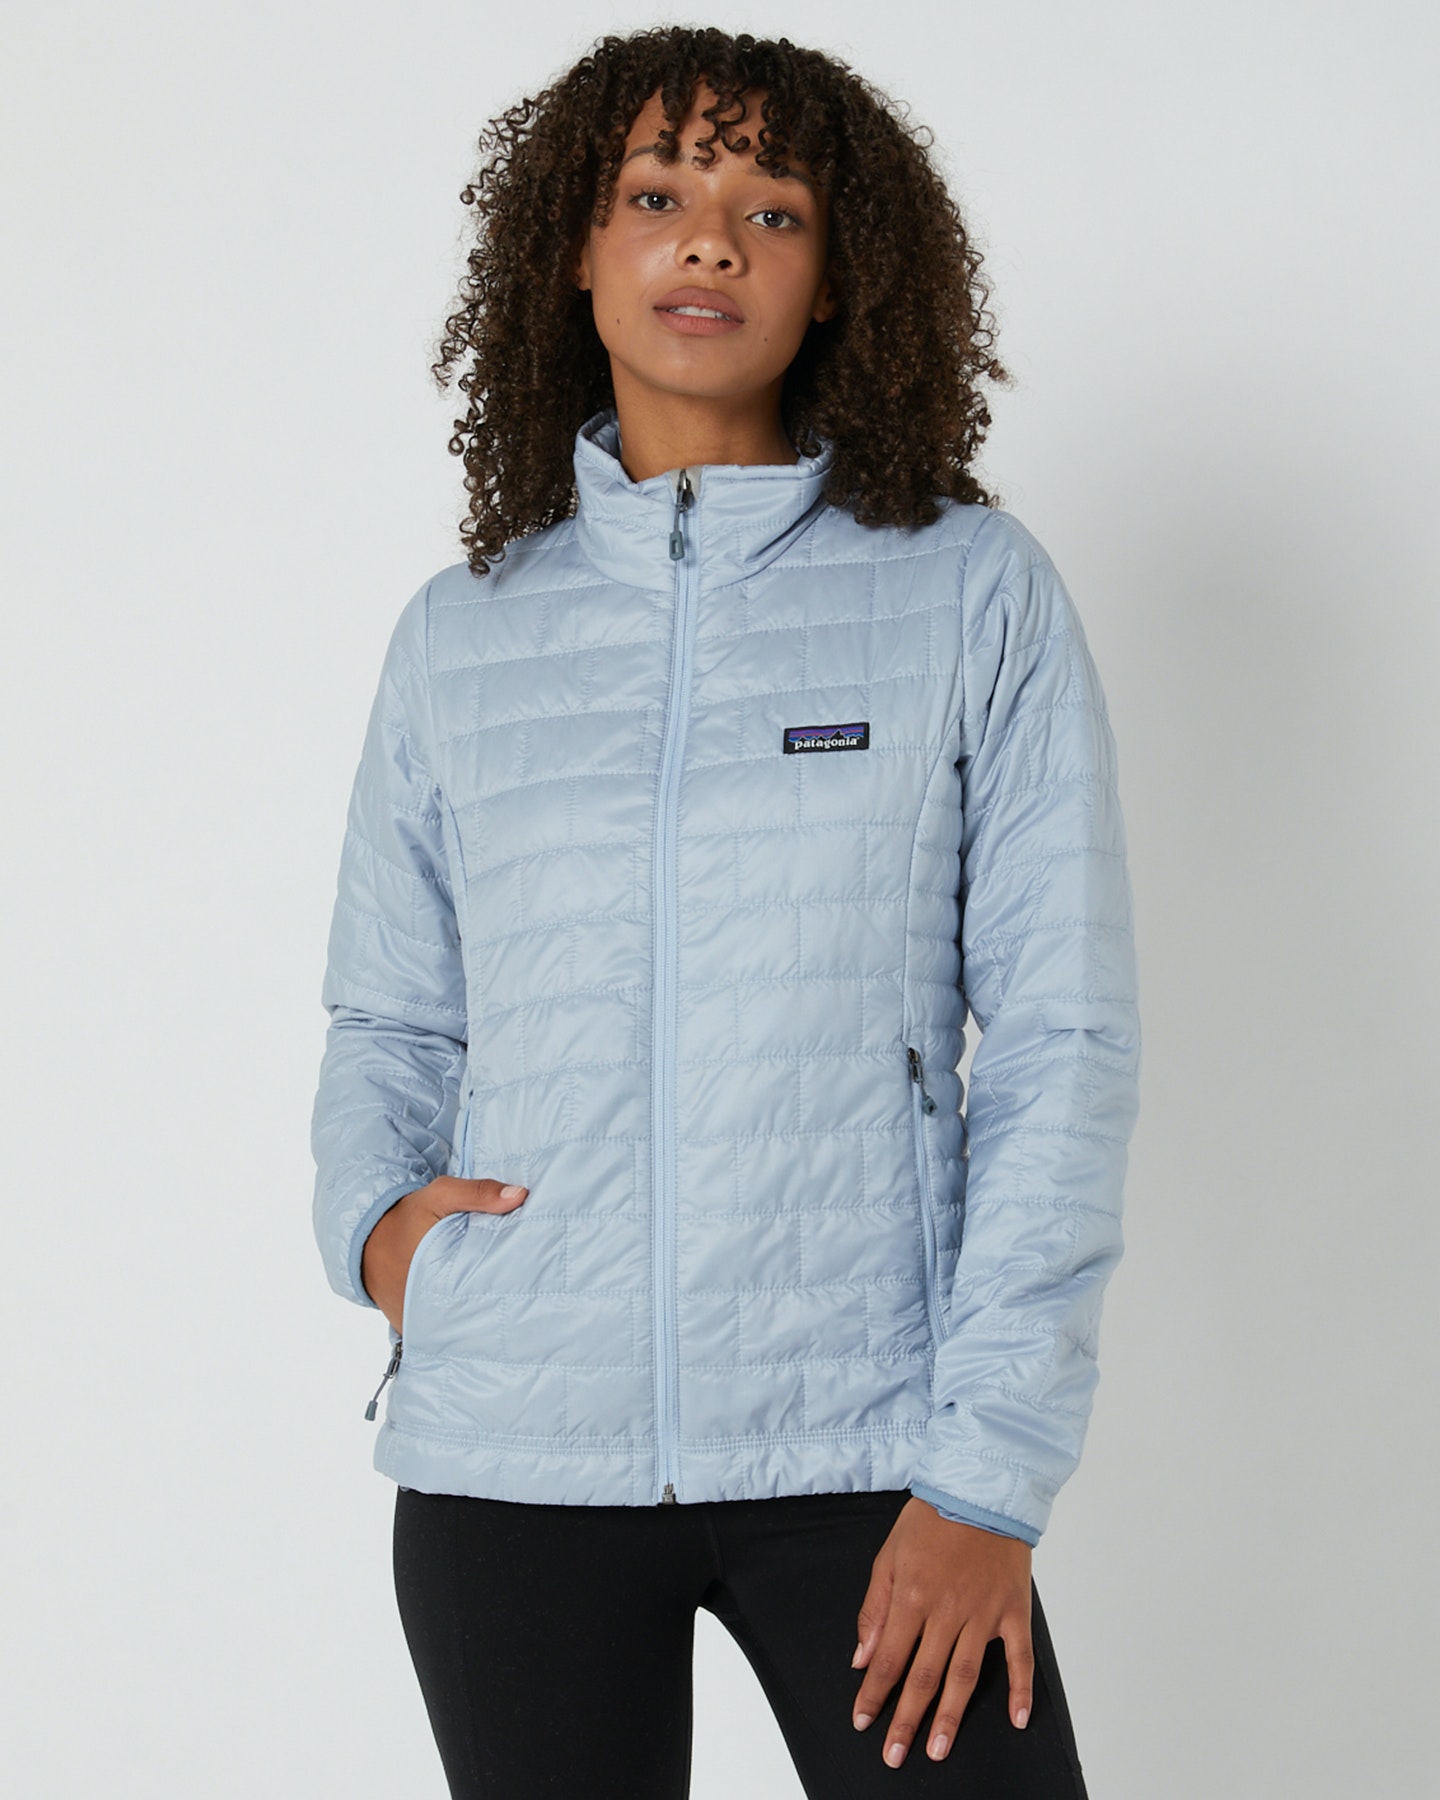 https://www.surfstitch.com/on/demandware.static/-/Sites-ss-master-catalog/default/dw8d46ee60/images/84217-STME-XS/STEAM-BLUE-WOMENS-CLOTHING-PATAGONIA-JACKETS-84217-STME-XS_1.JPG